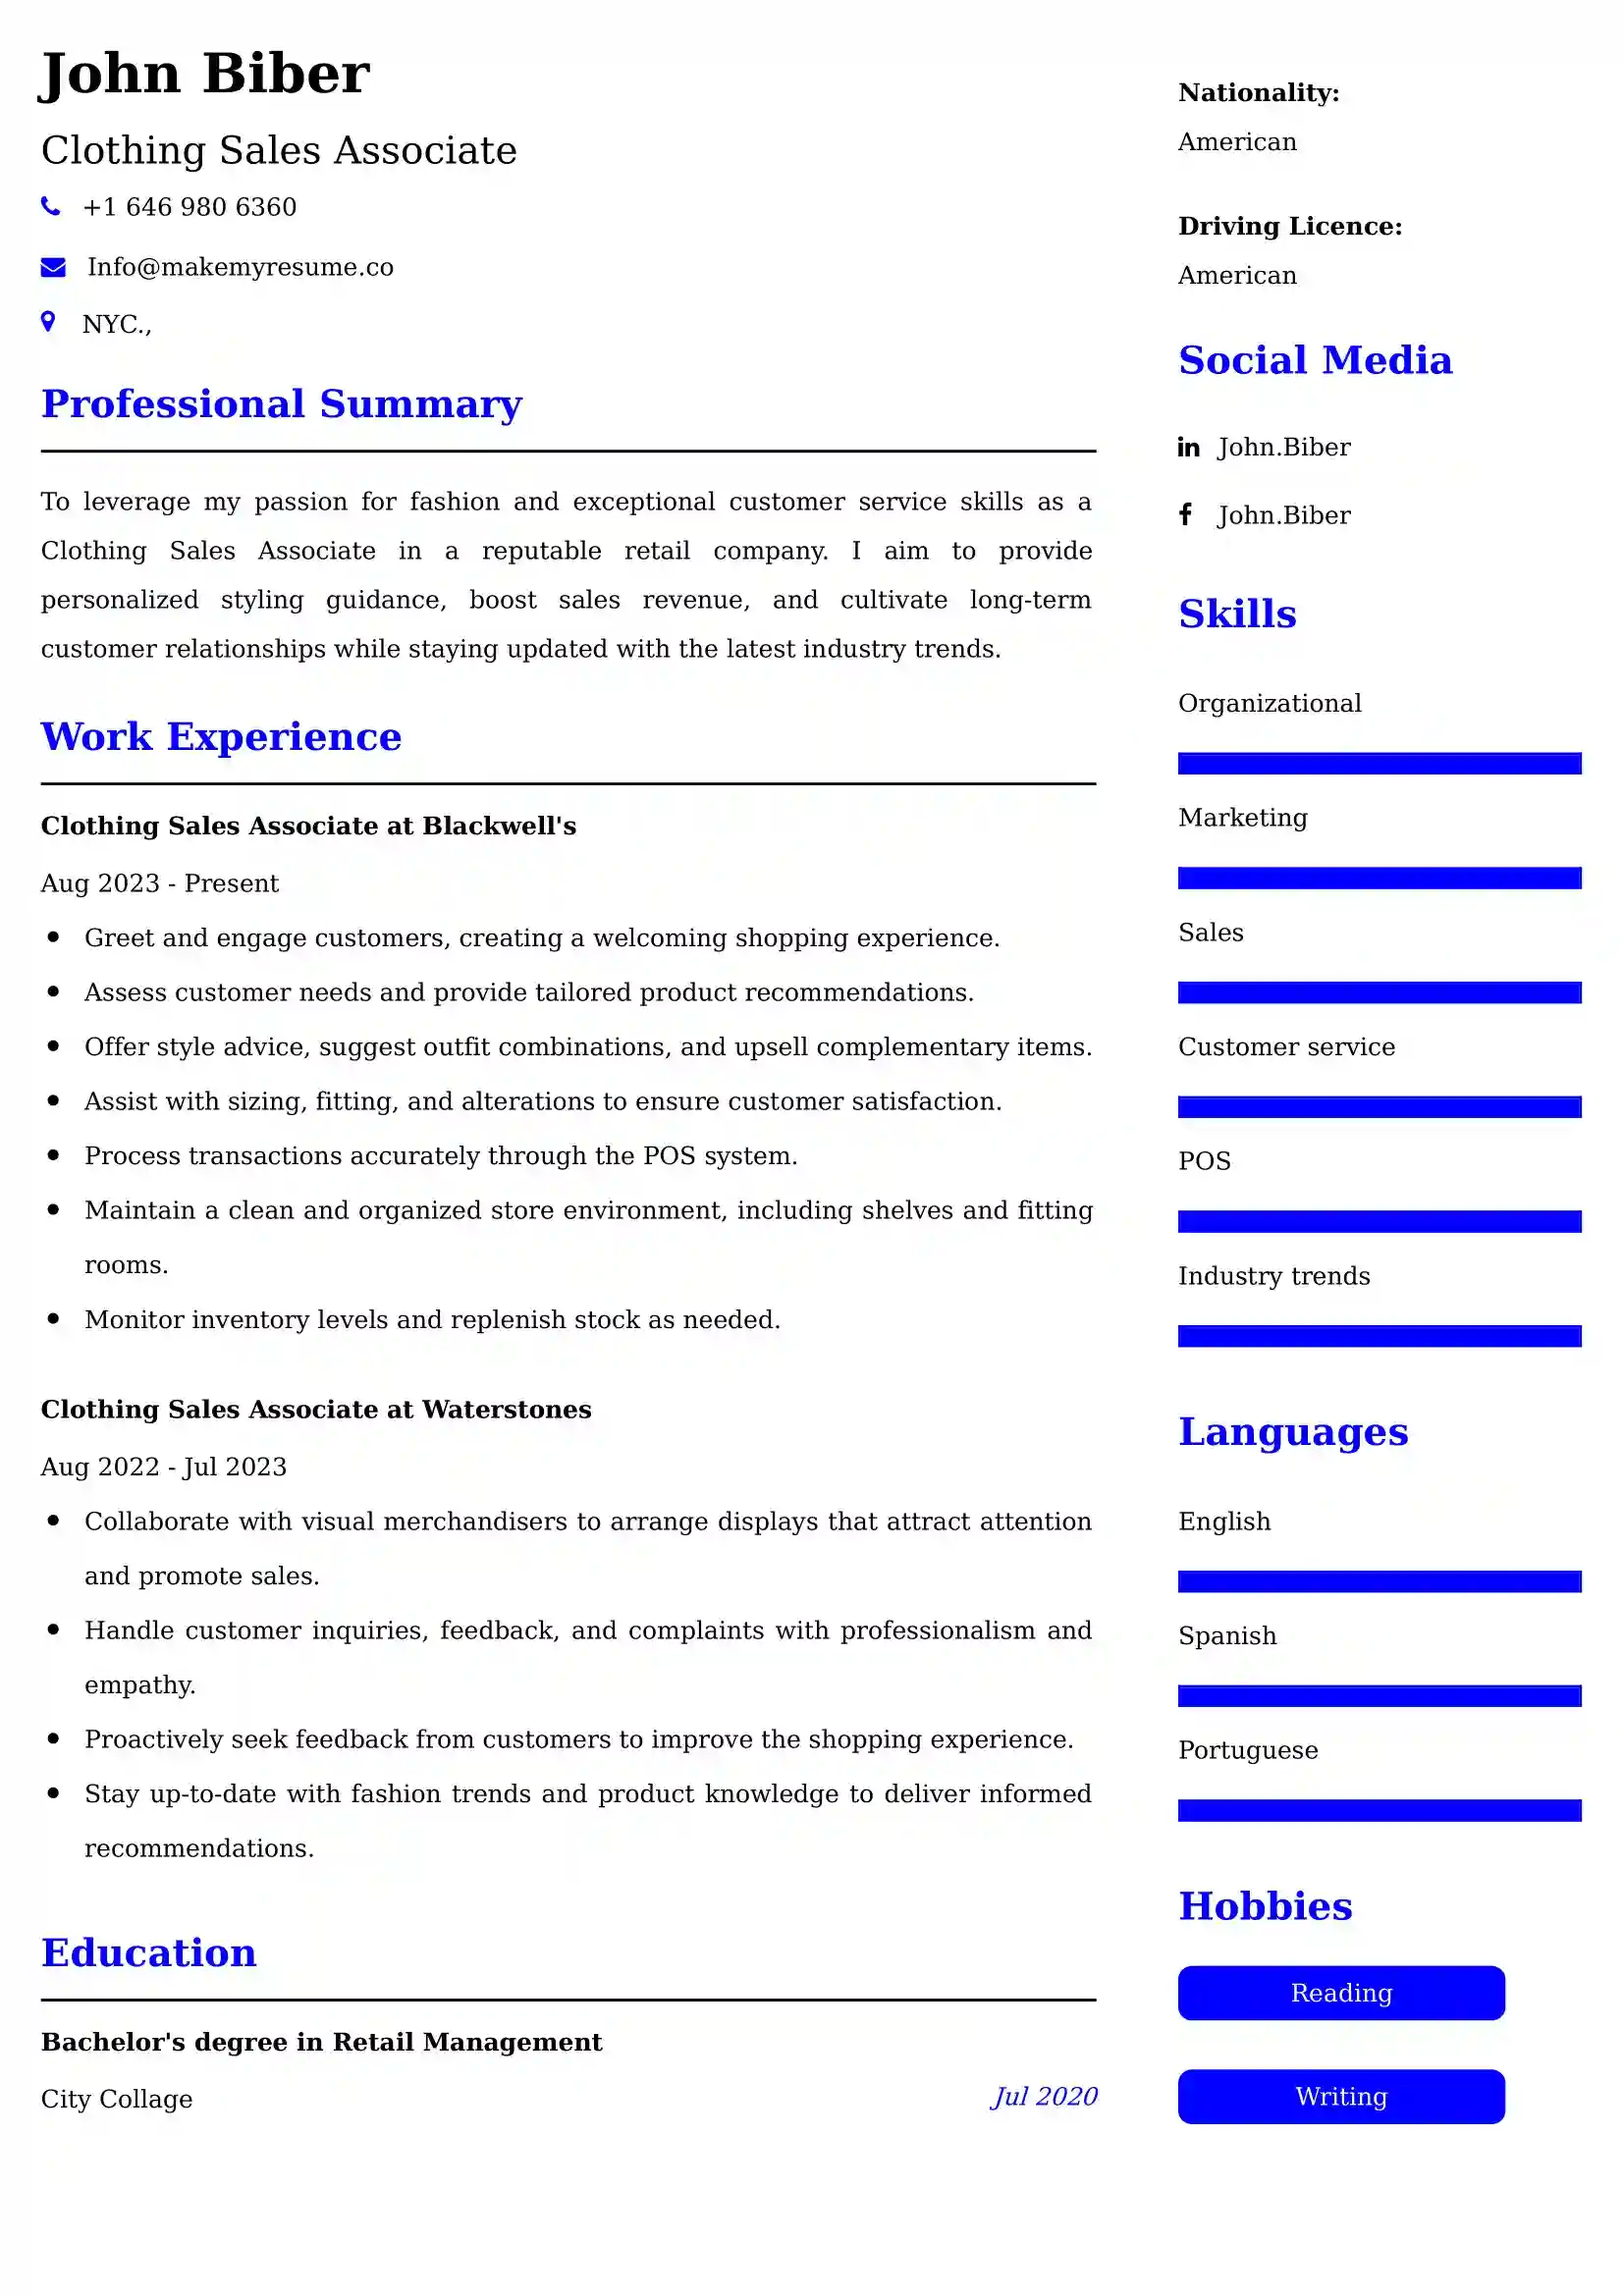 Clothing Sales Associate Resume Examples India